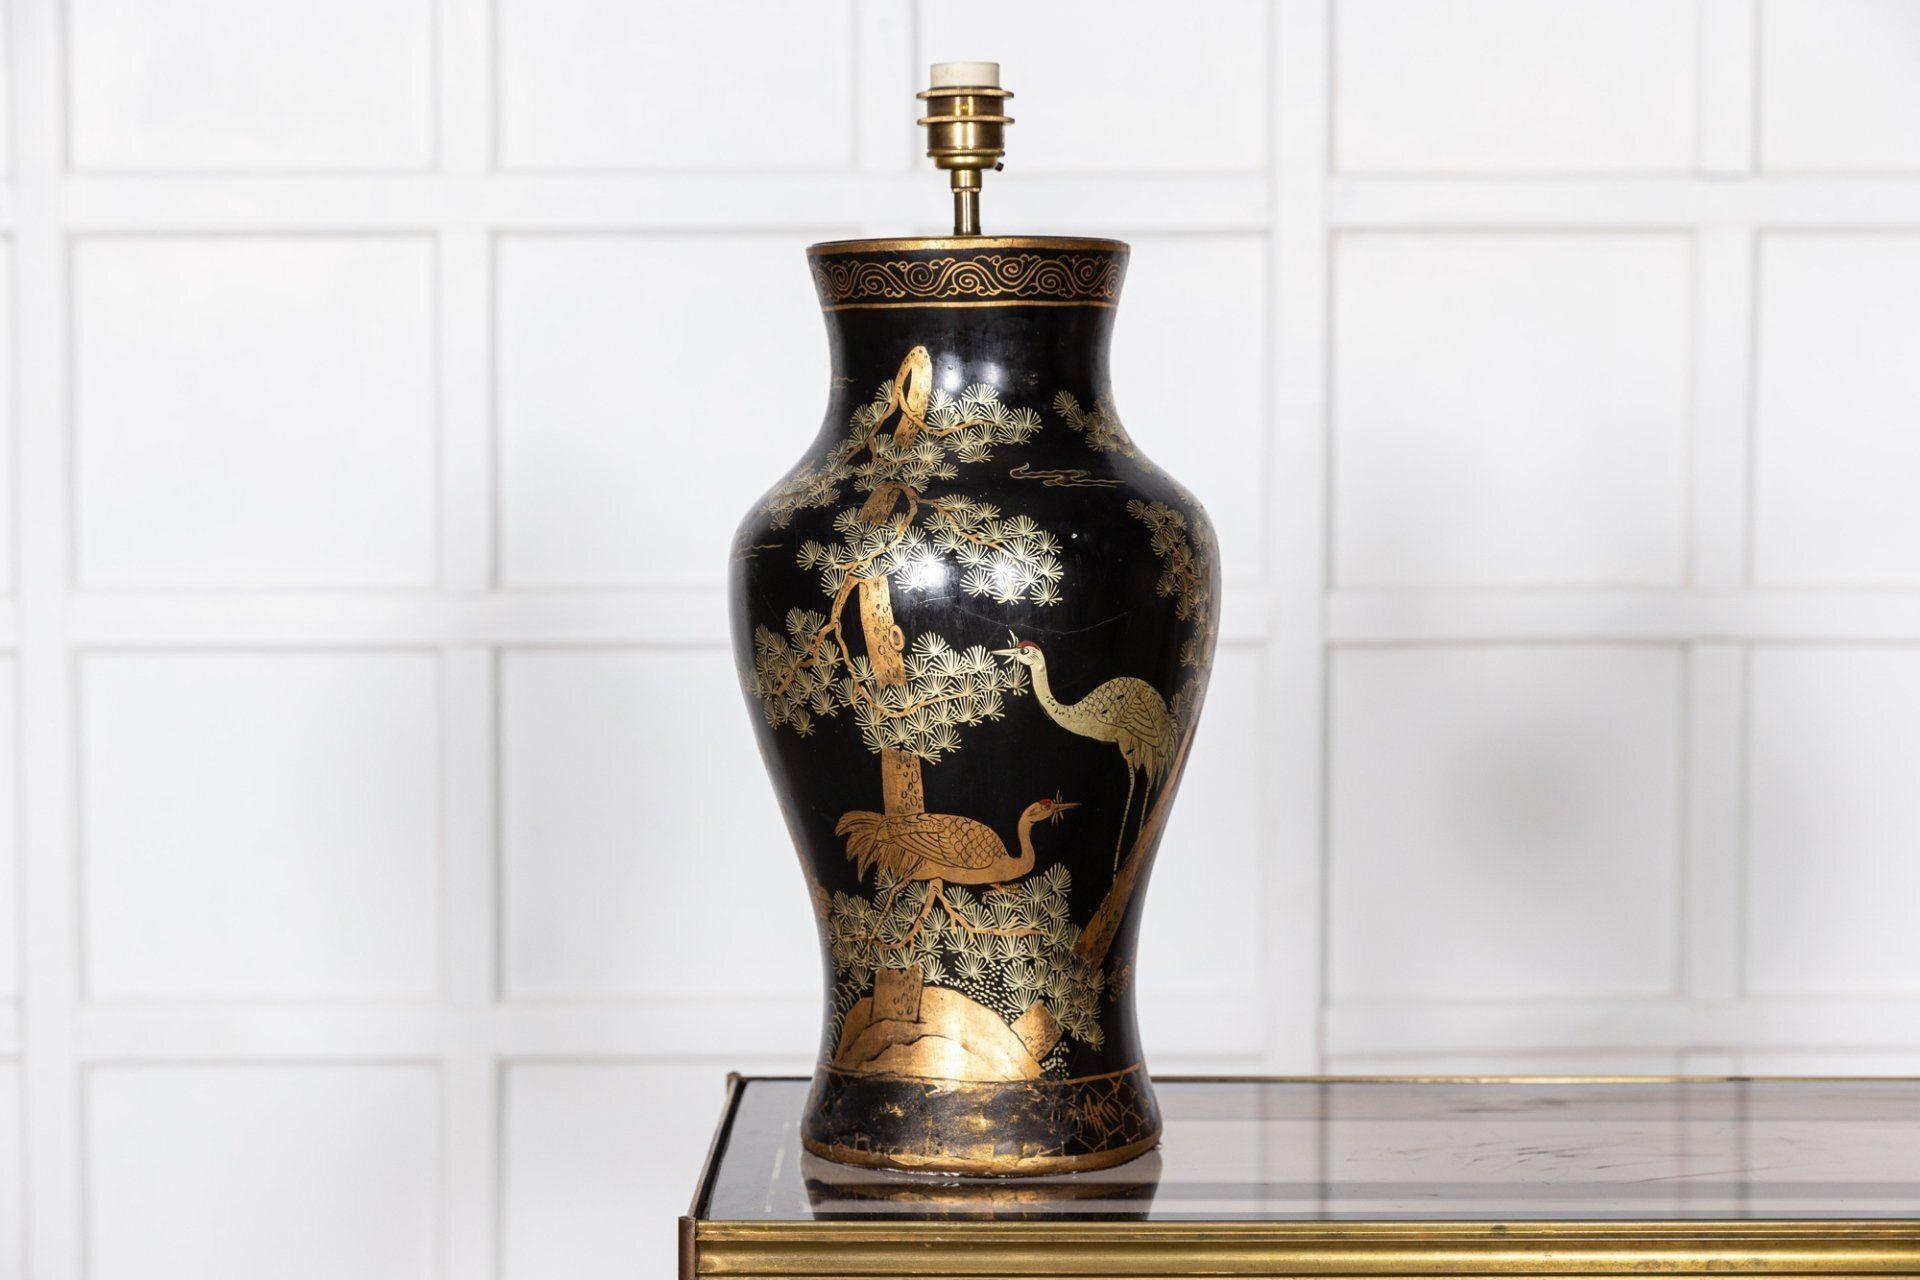 circa 1950
Pair English large Chinoiserie Papier-Mâché table lamps
A striking pair of lacquered black with gilded oriental design, a decorative scene of a fir tree, stork and deer, the top and base of the lamps are finished with a gilded pattern.